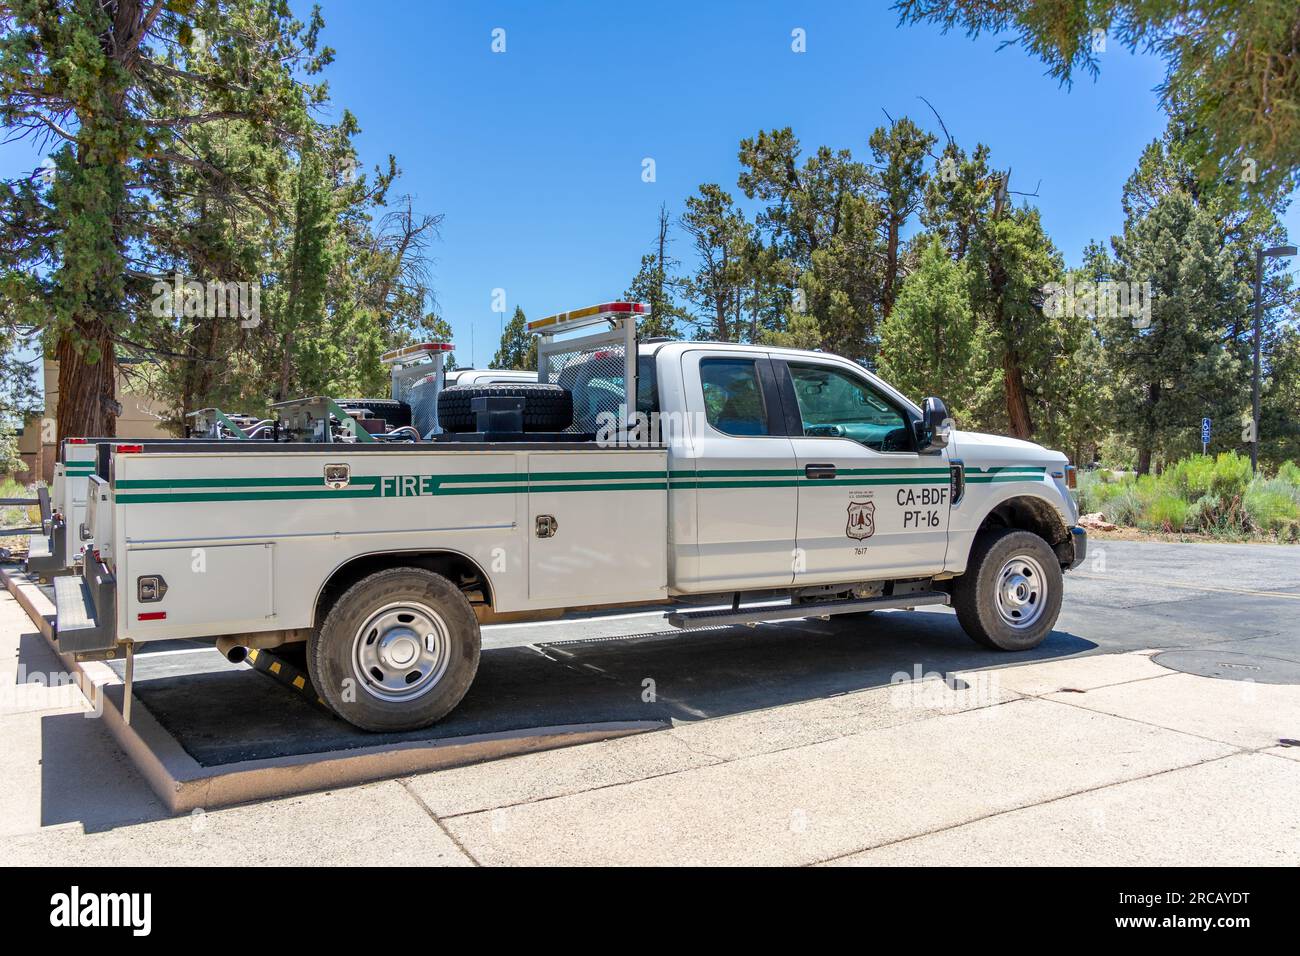 Big Bear Lake, CA, USA – July 8, 2023: A United States forest fire service pickup truck parked in the San Bernardino National Forest in California. Stock Photo